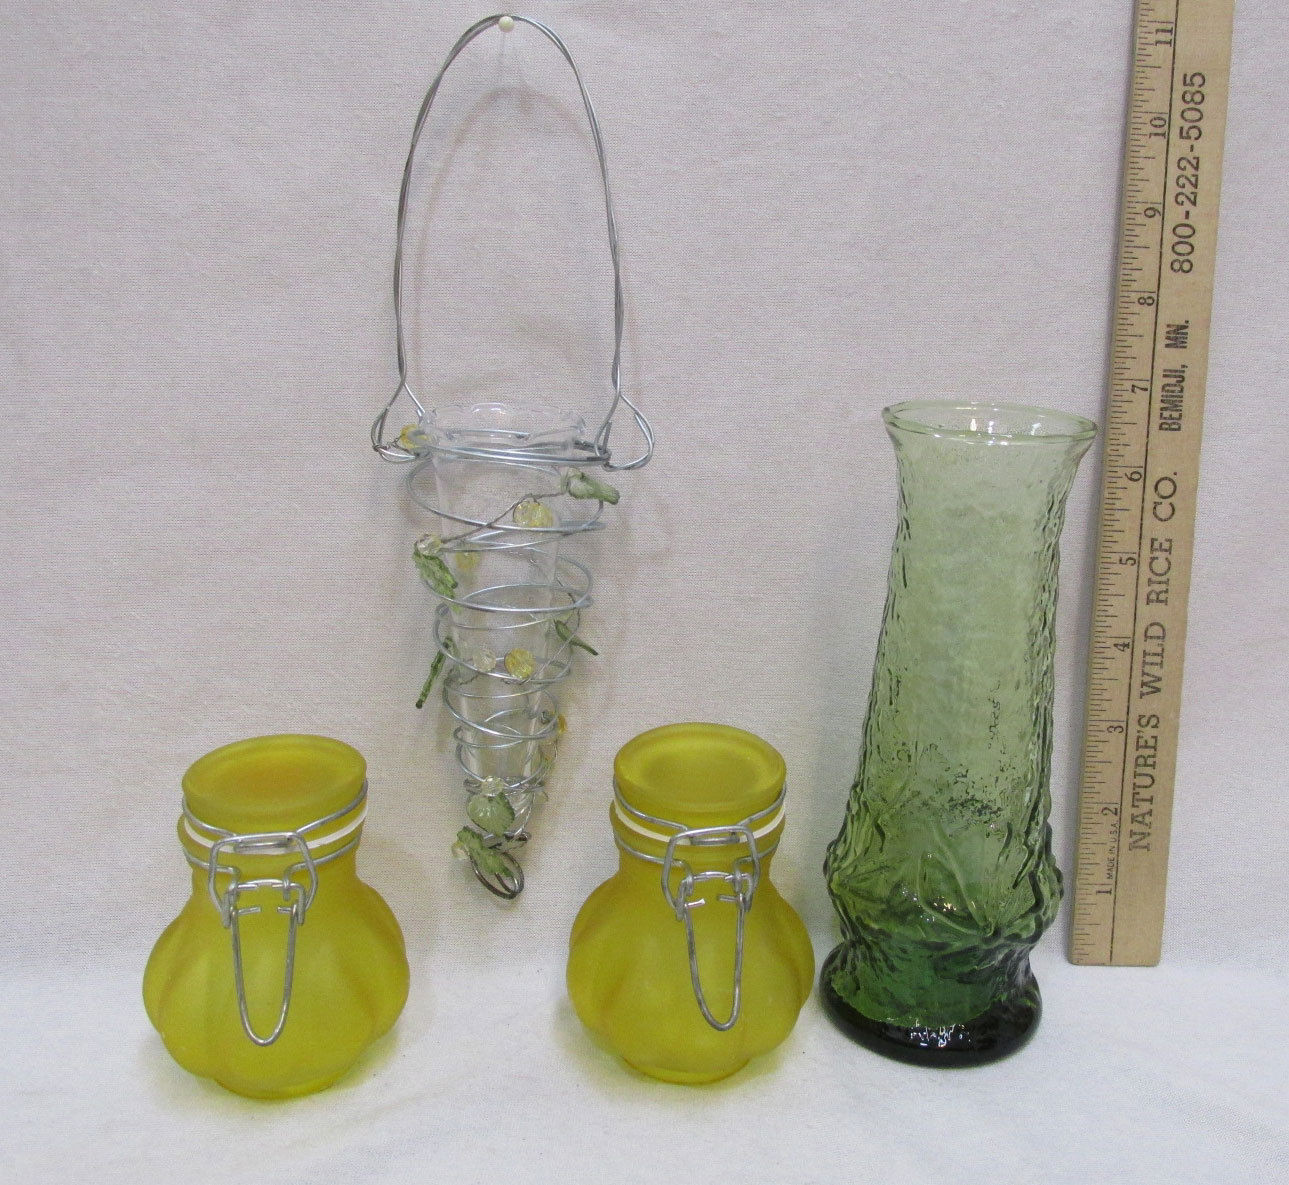 22 Stylish Low Cost Glass Vases 2022 free download low cost glass vases of hanging bud vase glass jars green yellow and 50 similar items in hanging bud vase glass jars green yellow shade leaf bead charms floral lot of 4